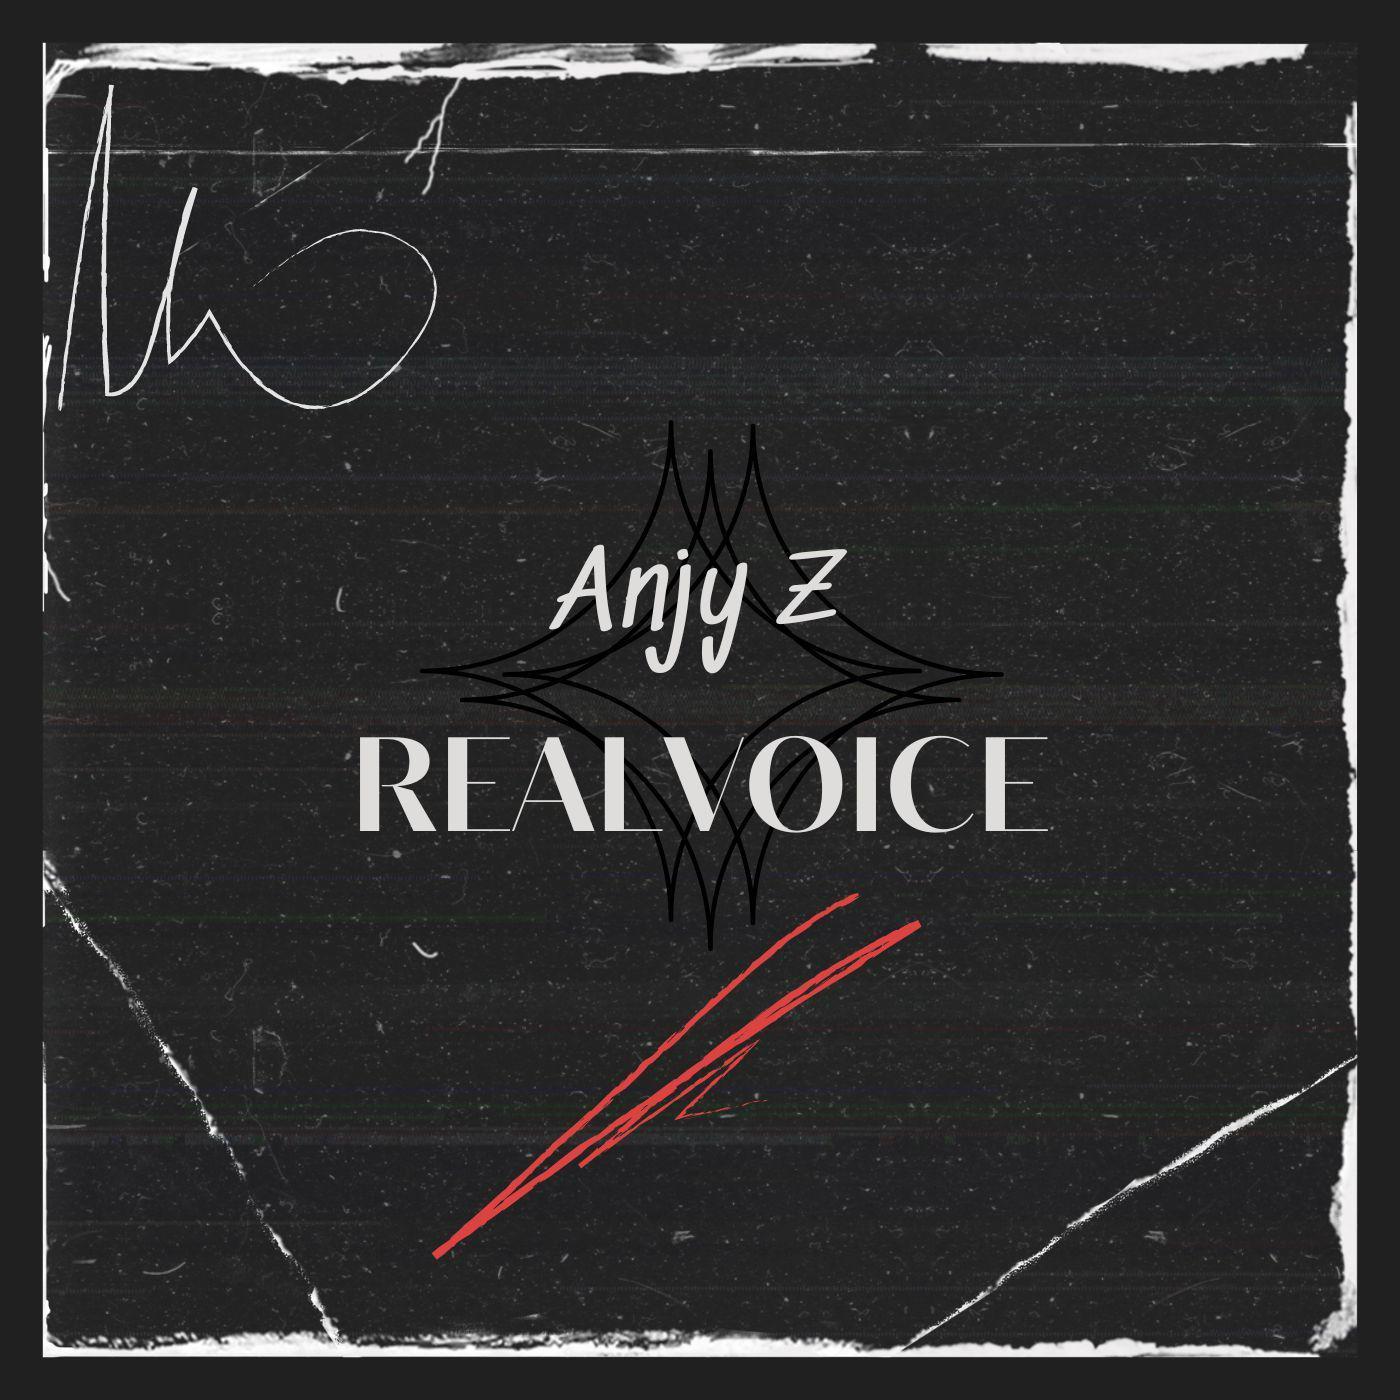 Anjy Z - Real voice